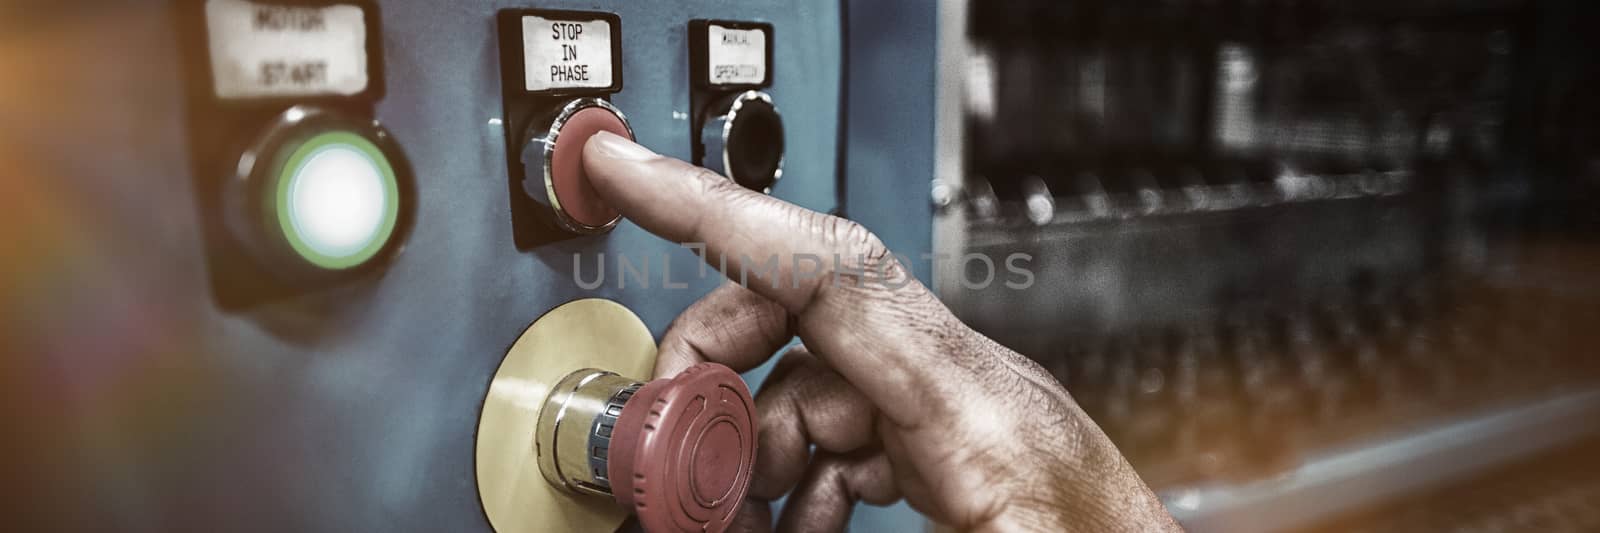 Hands of factory worker pressing a red button on the control board in factory